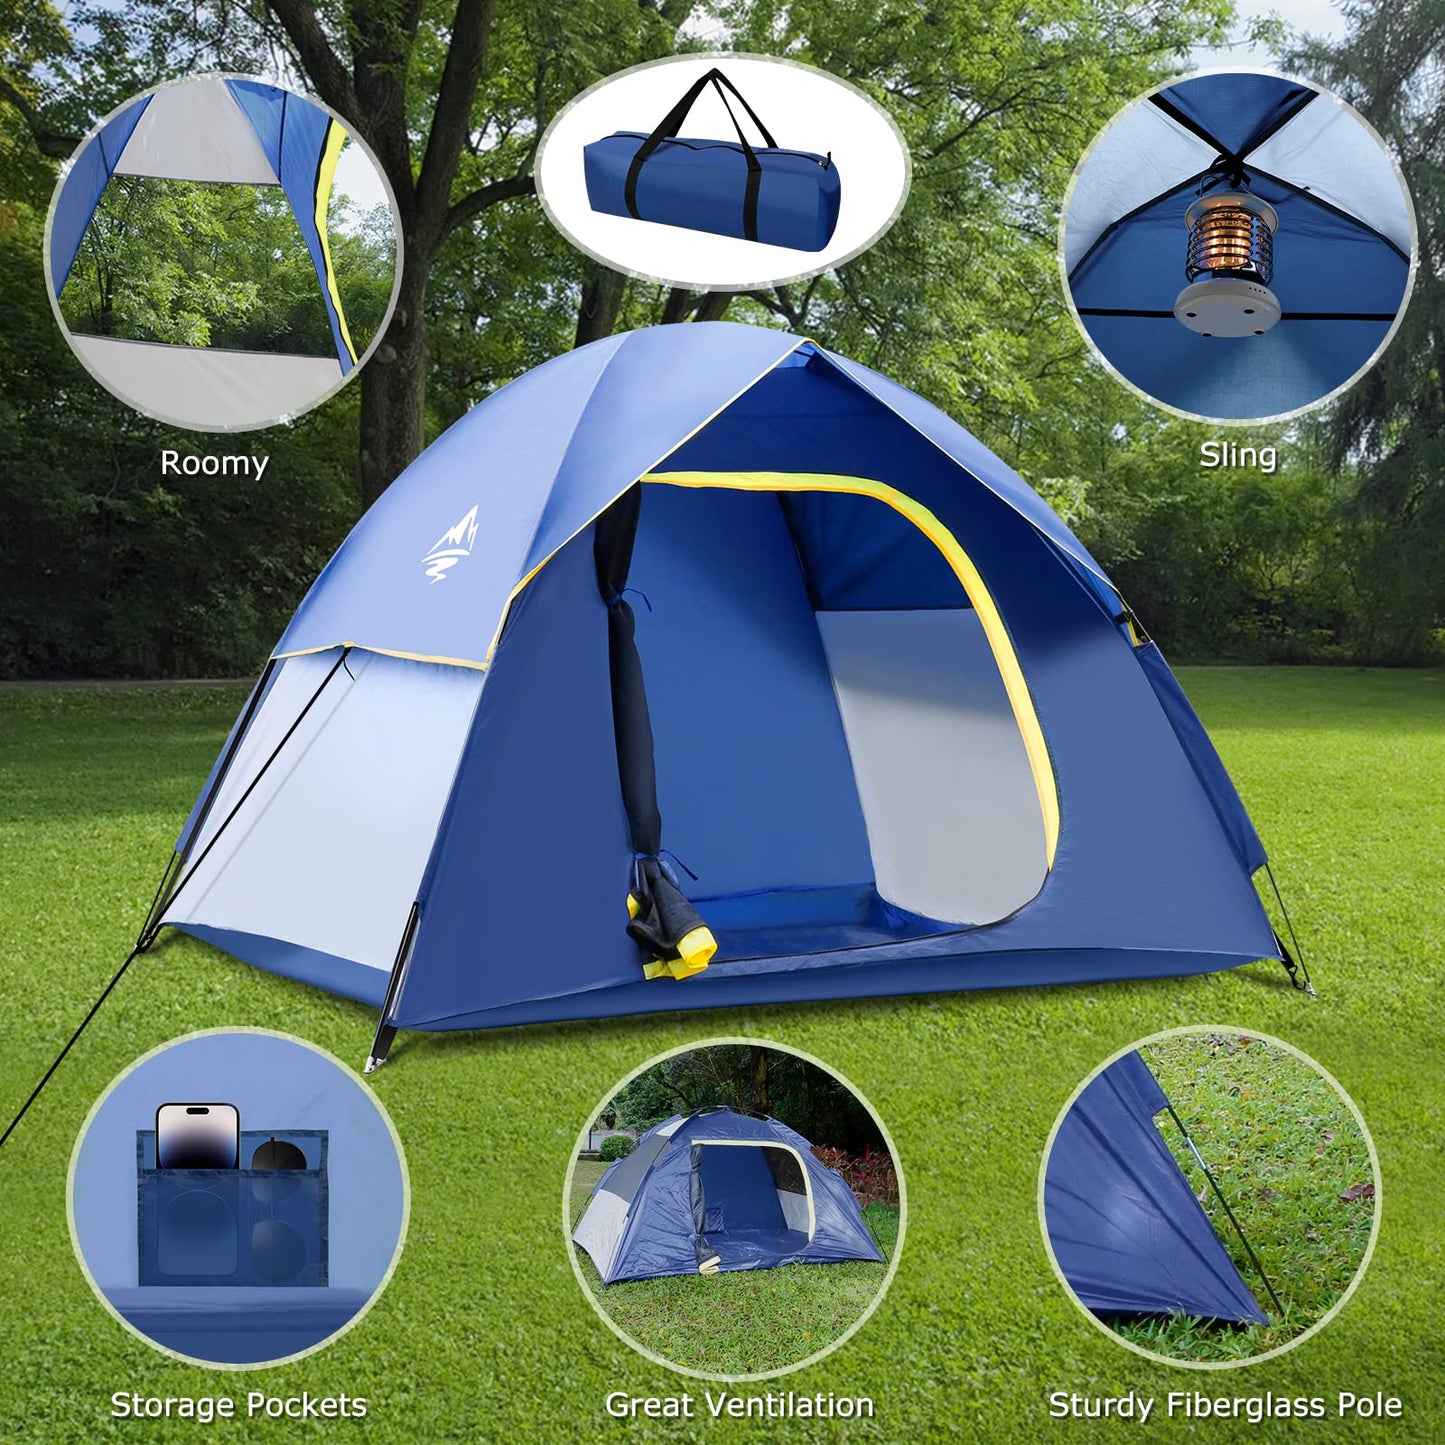 GLADTOP Camping Tent 1/2/3 Person Tent with Removable Rainfly and Carry Bag, Easy Set Up Portable Tent, Lightweight Outdoor Tent for Backpacking, Hiking